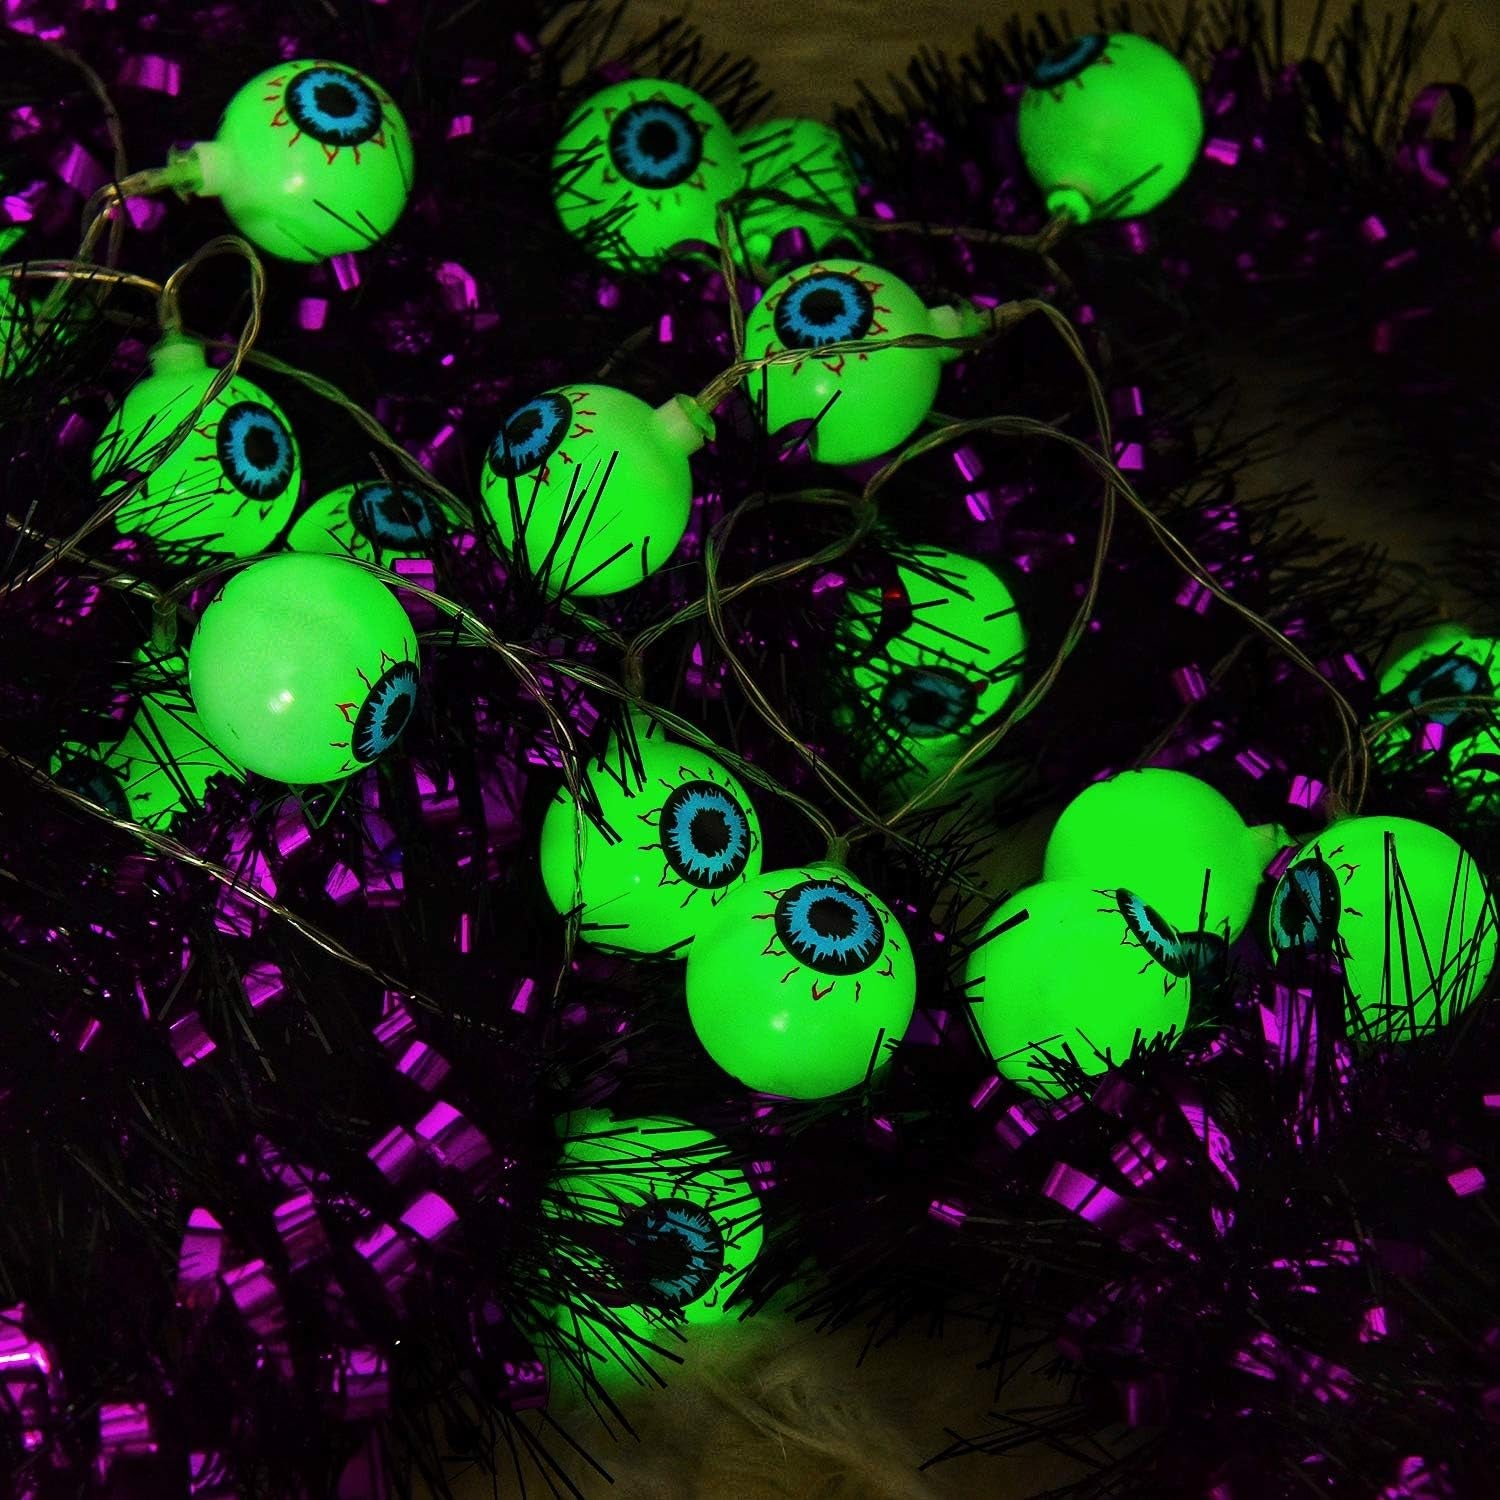 Halloween Eyeball String Lights, Halloween Decoration Cute Scary with 30 LED Eyeballs，Waterproof 8 Modes Twinkle Lights，Halloween Indoor/Outdoor for Party, House, Yard, Garden Decorations (Green)